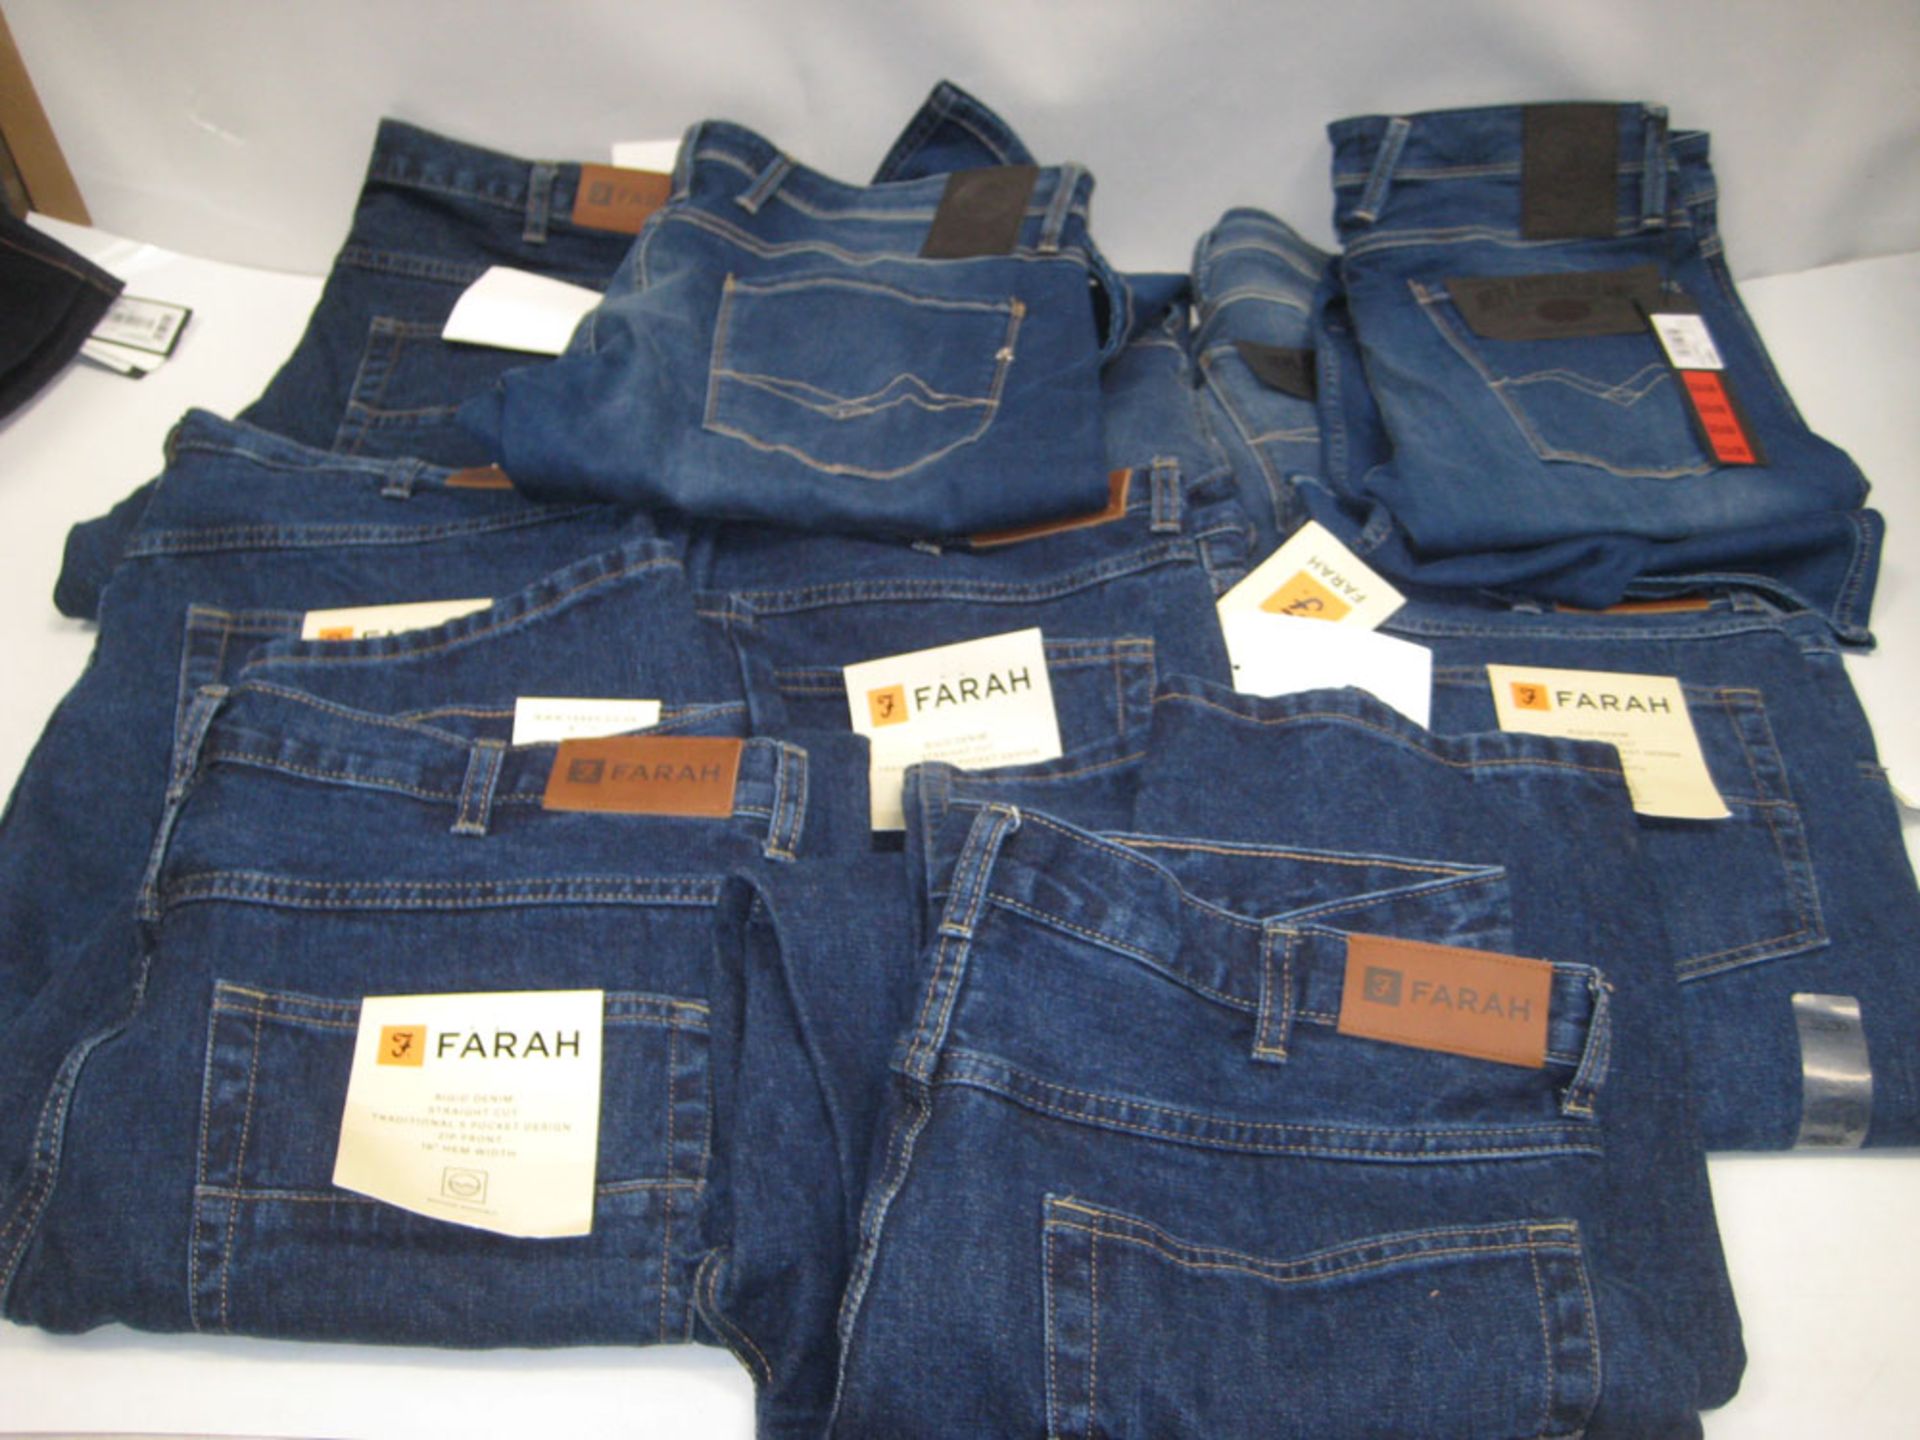 Bag containing 6 pairs of Farah jeans together with 4 pairs of Replay jeans